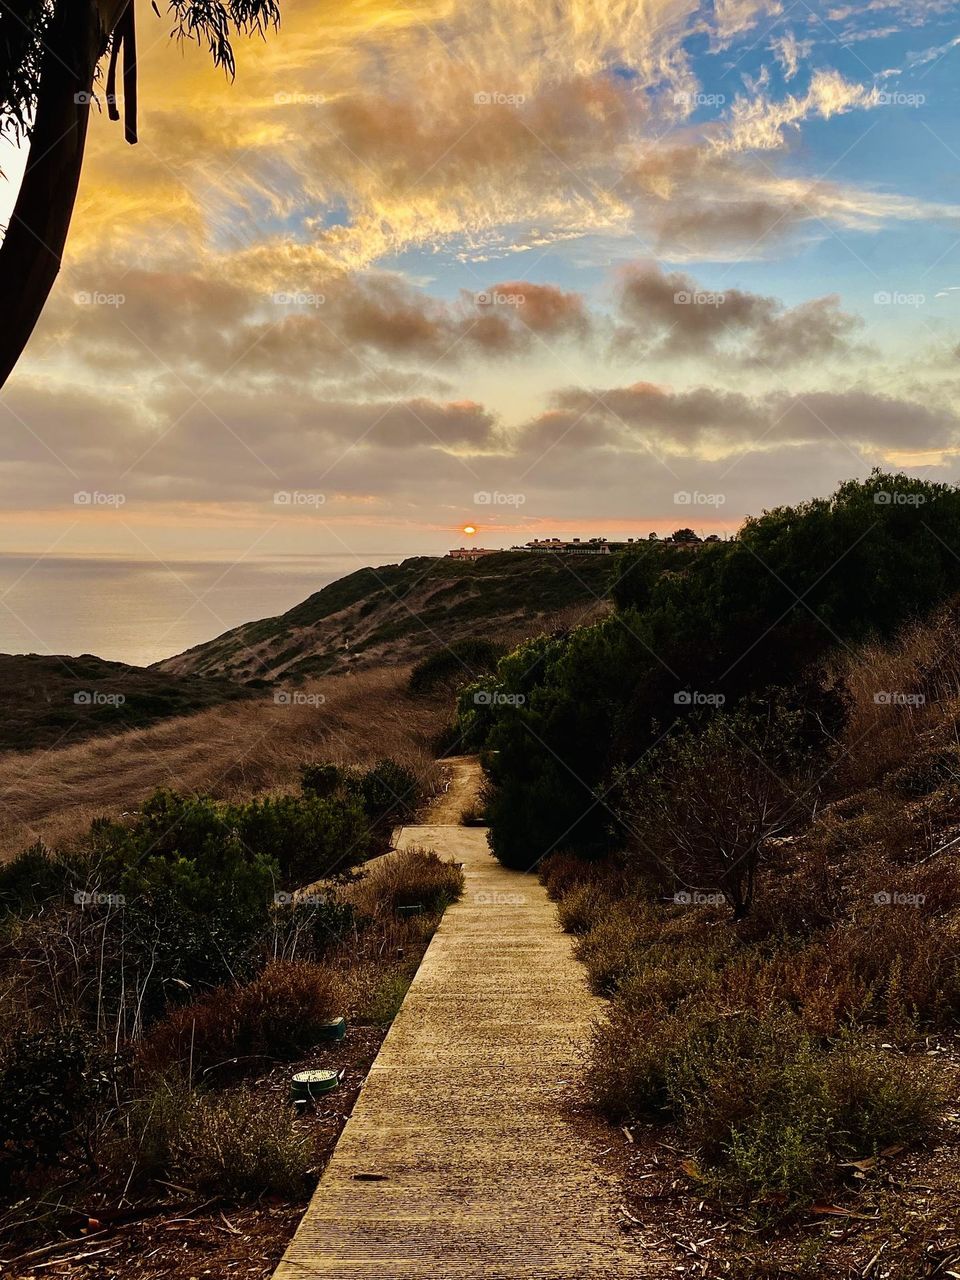 Trail to the Sunset